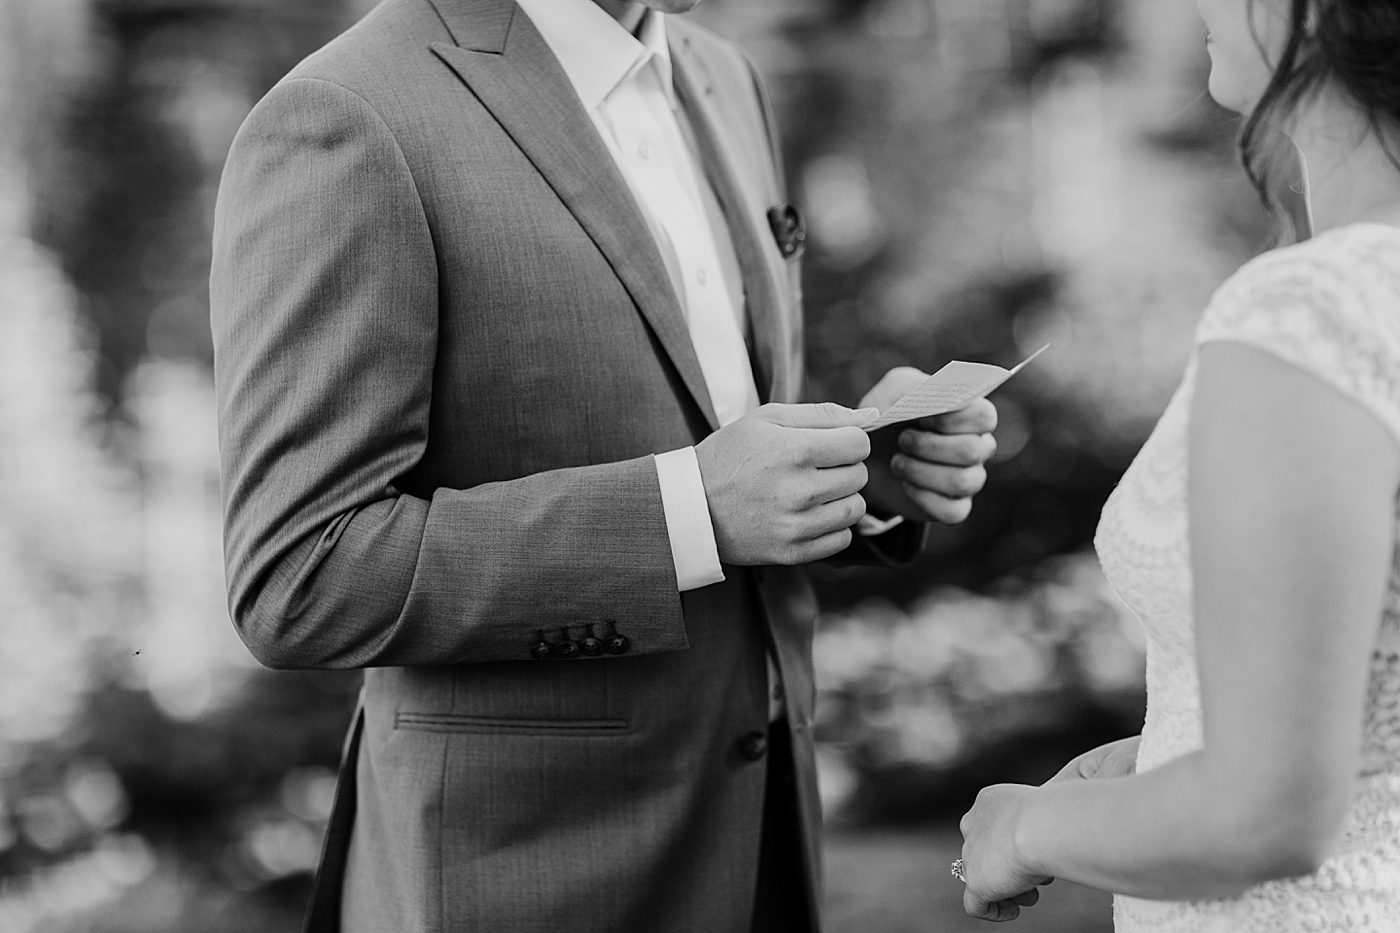 Bride and groom exchange private vows before Mount Rainier Elopement. Photographed by PNW Adventure Elopement Photographer, Megan Montalvo Photography. 